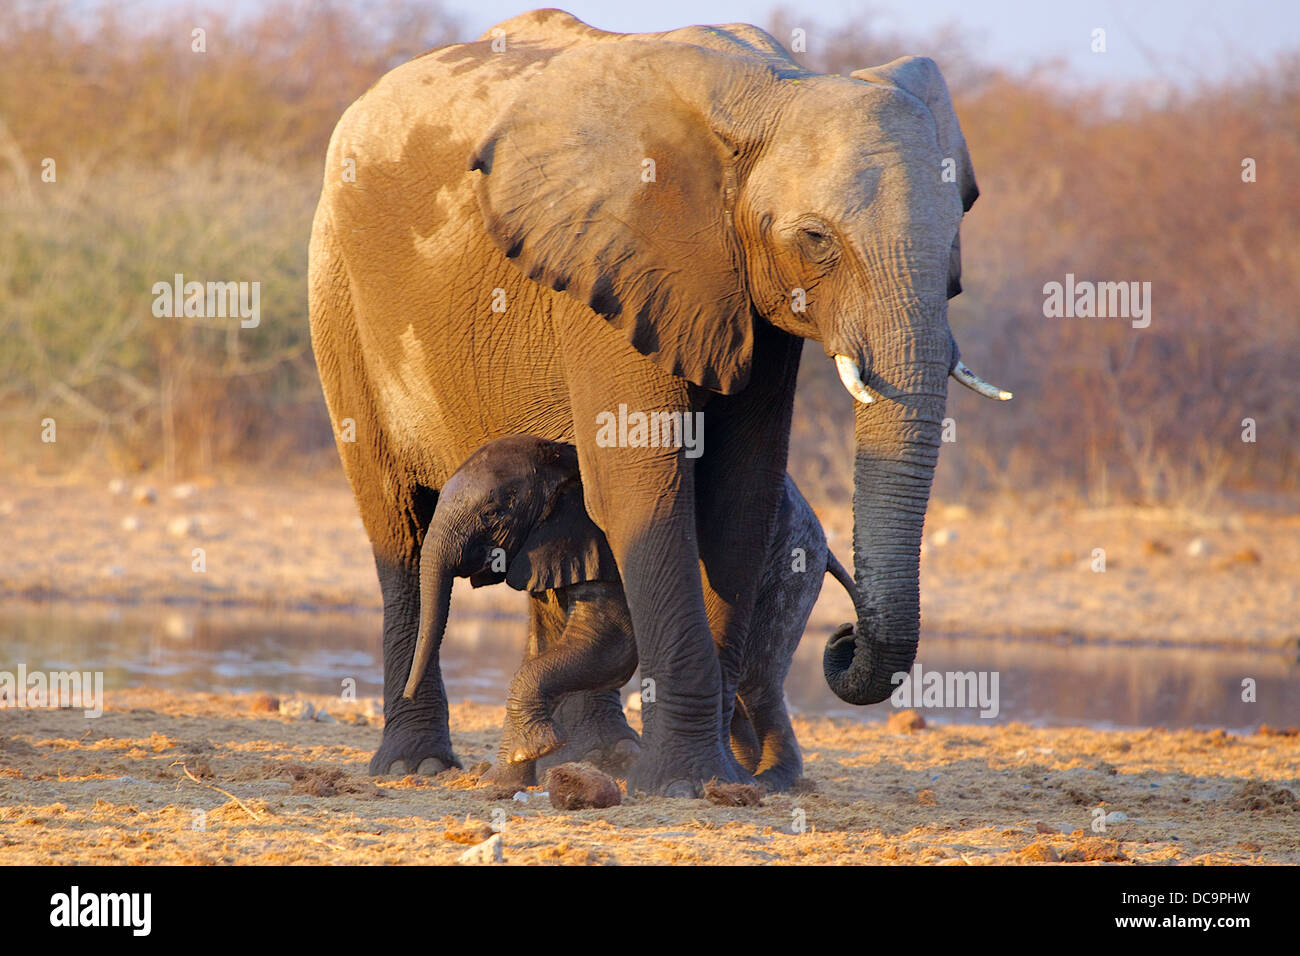 Baby elephant straddled by mother near waterhole Stock Photo